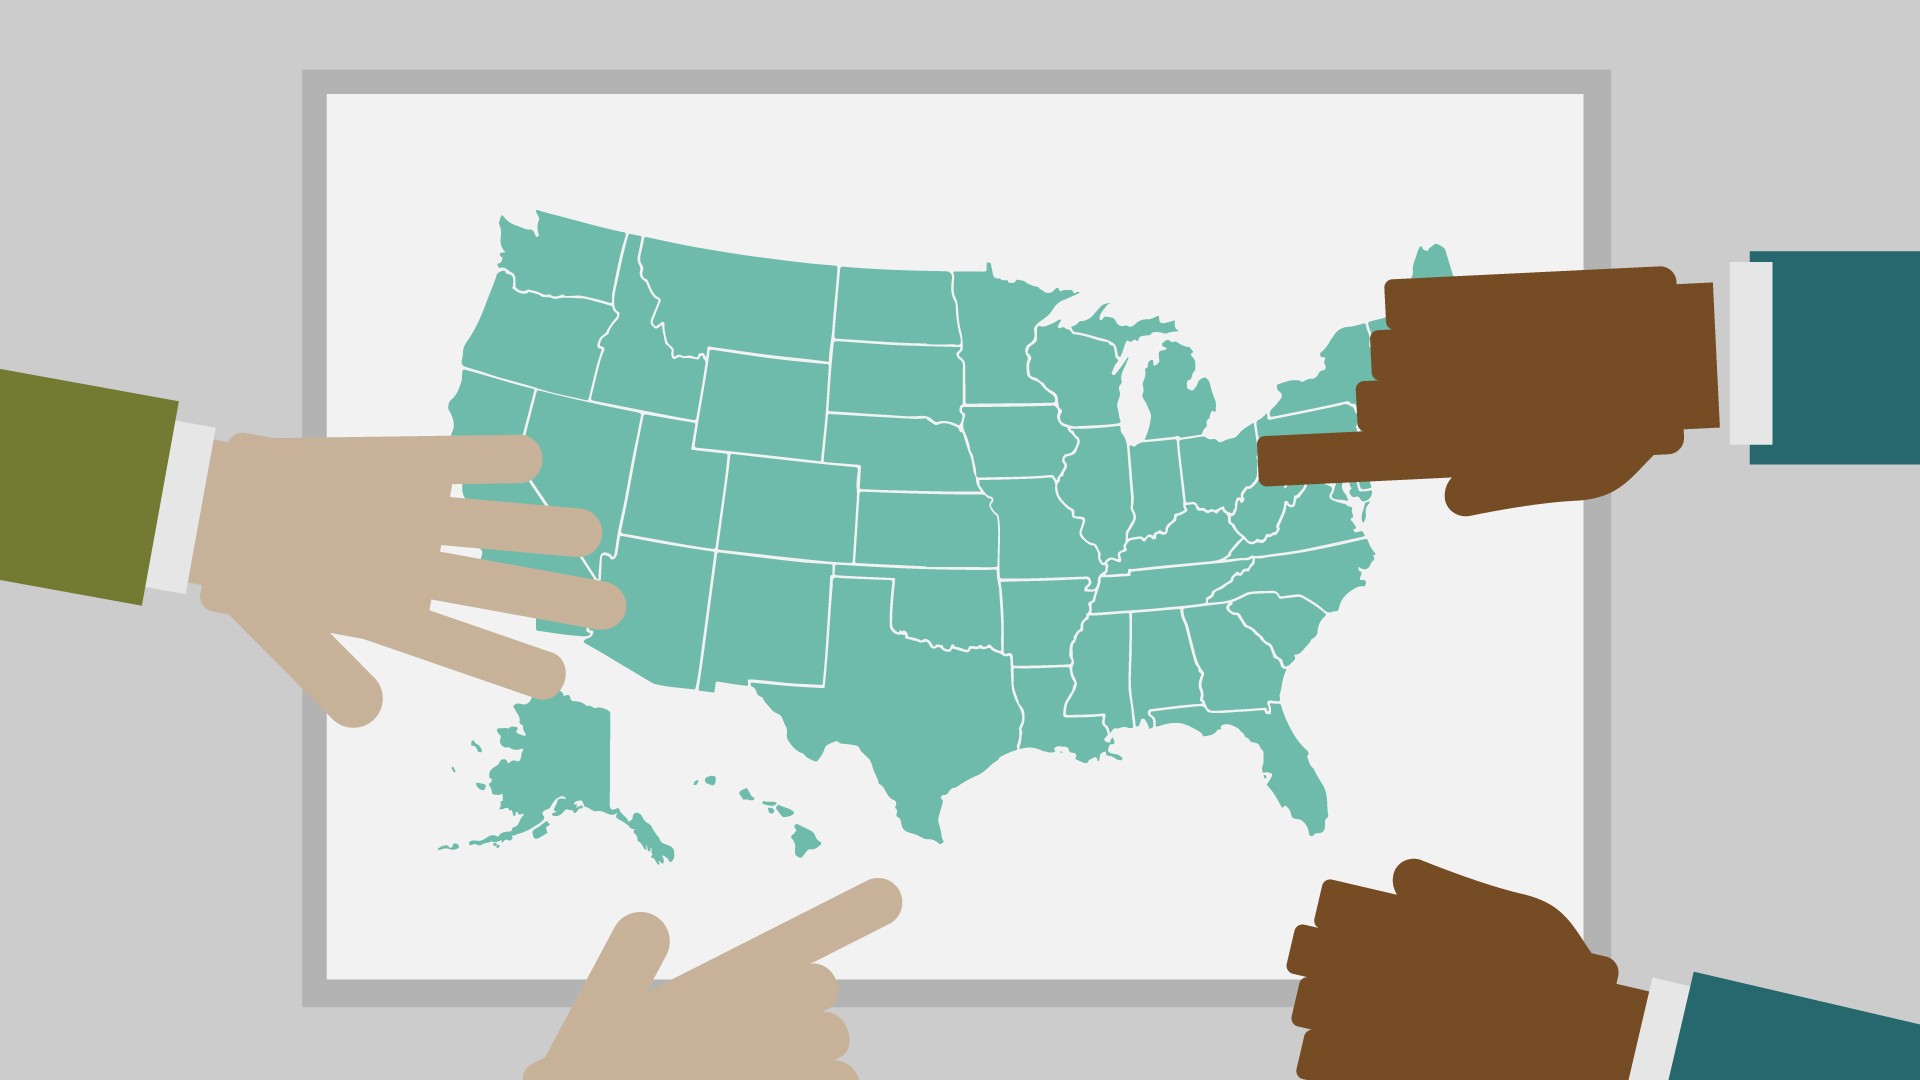 Hands pointing to a map of the United States